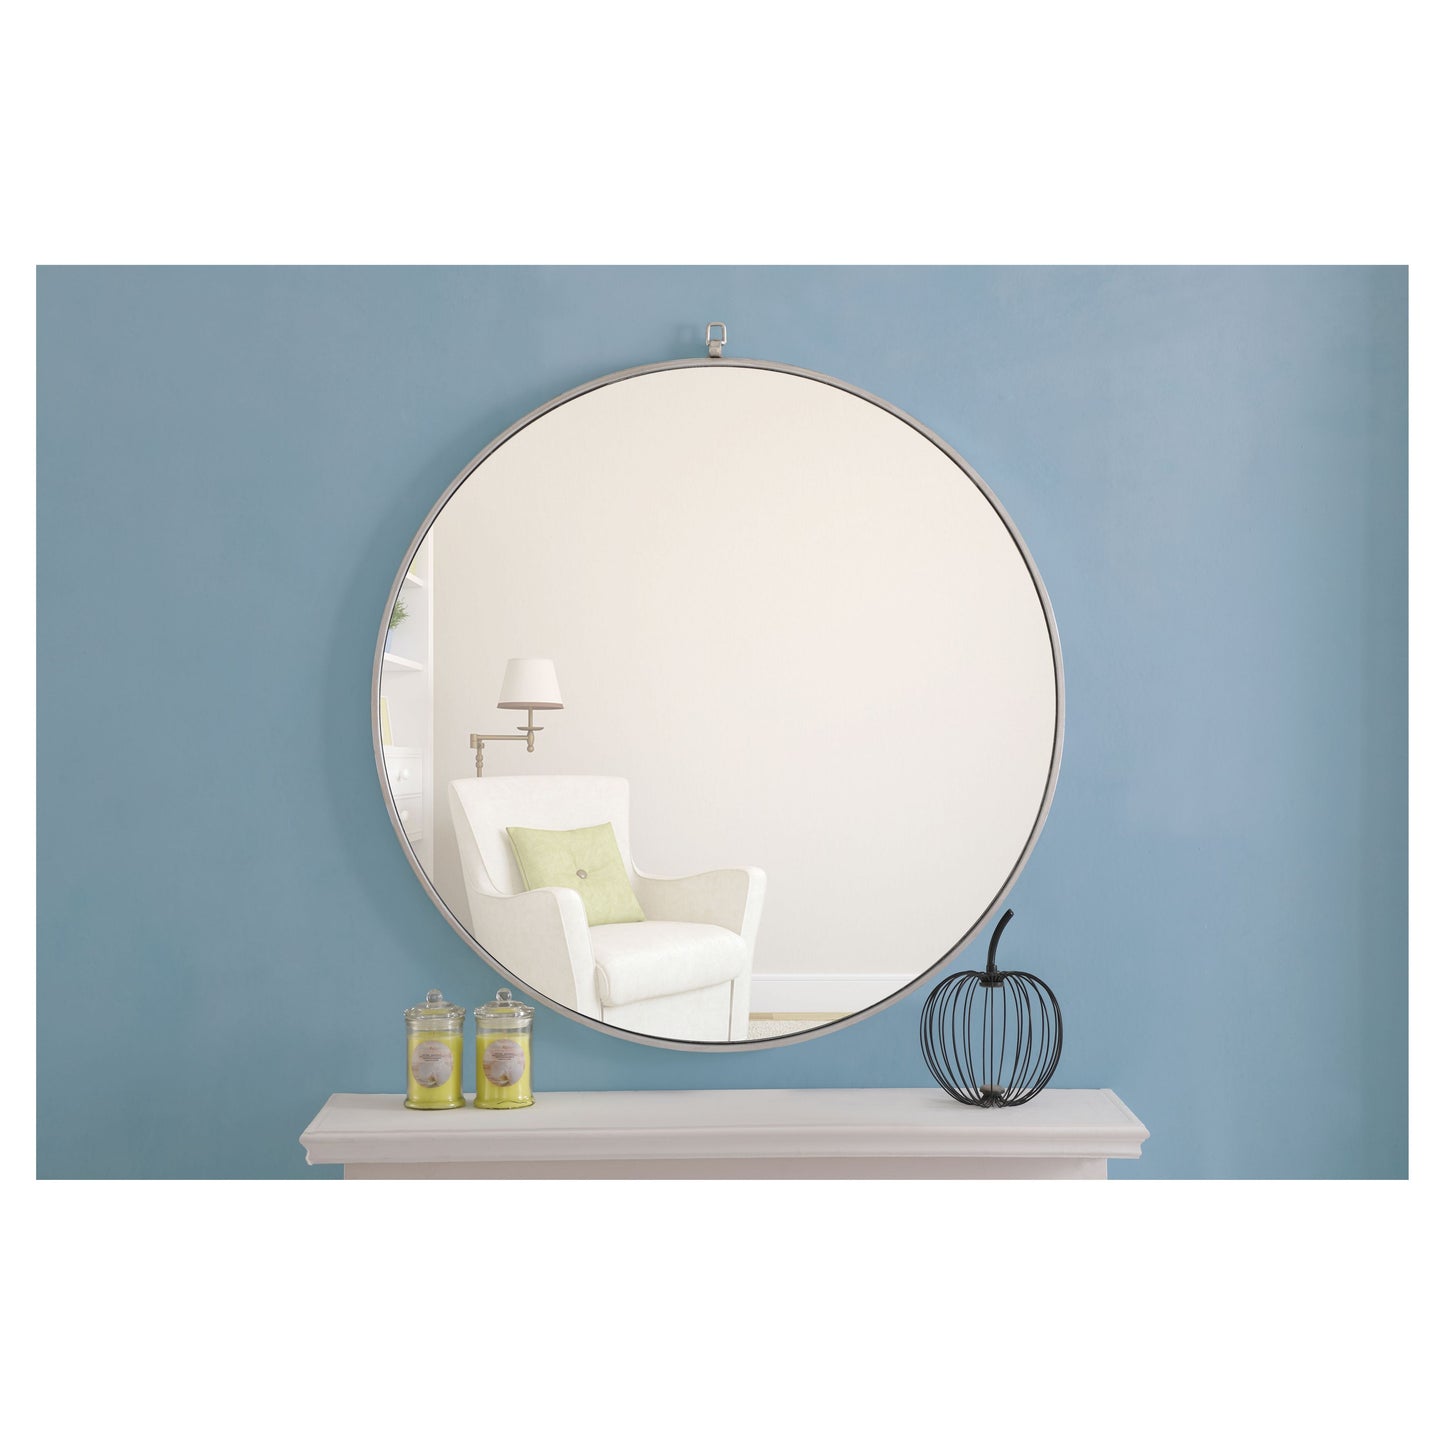 MR4066S Rowan 42" x 42" Metal Framed Round Mirror with Decorative Hook in Silver